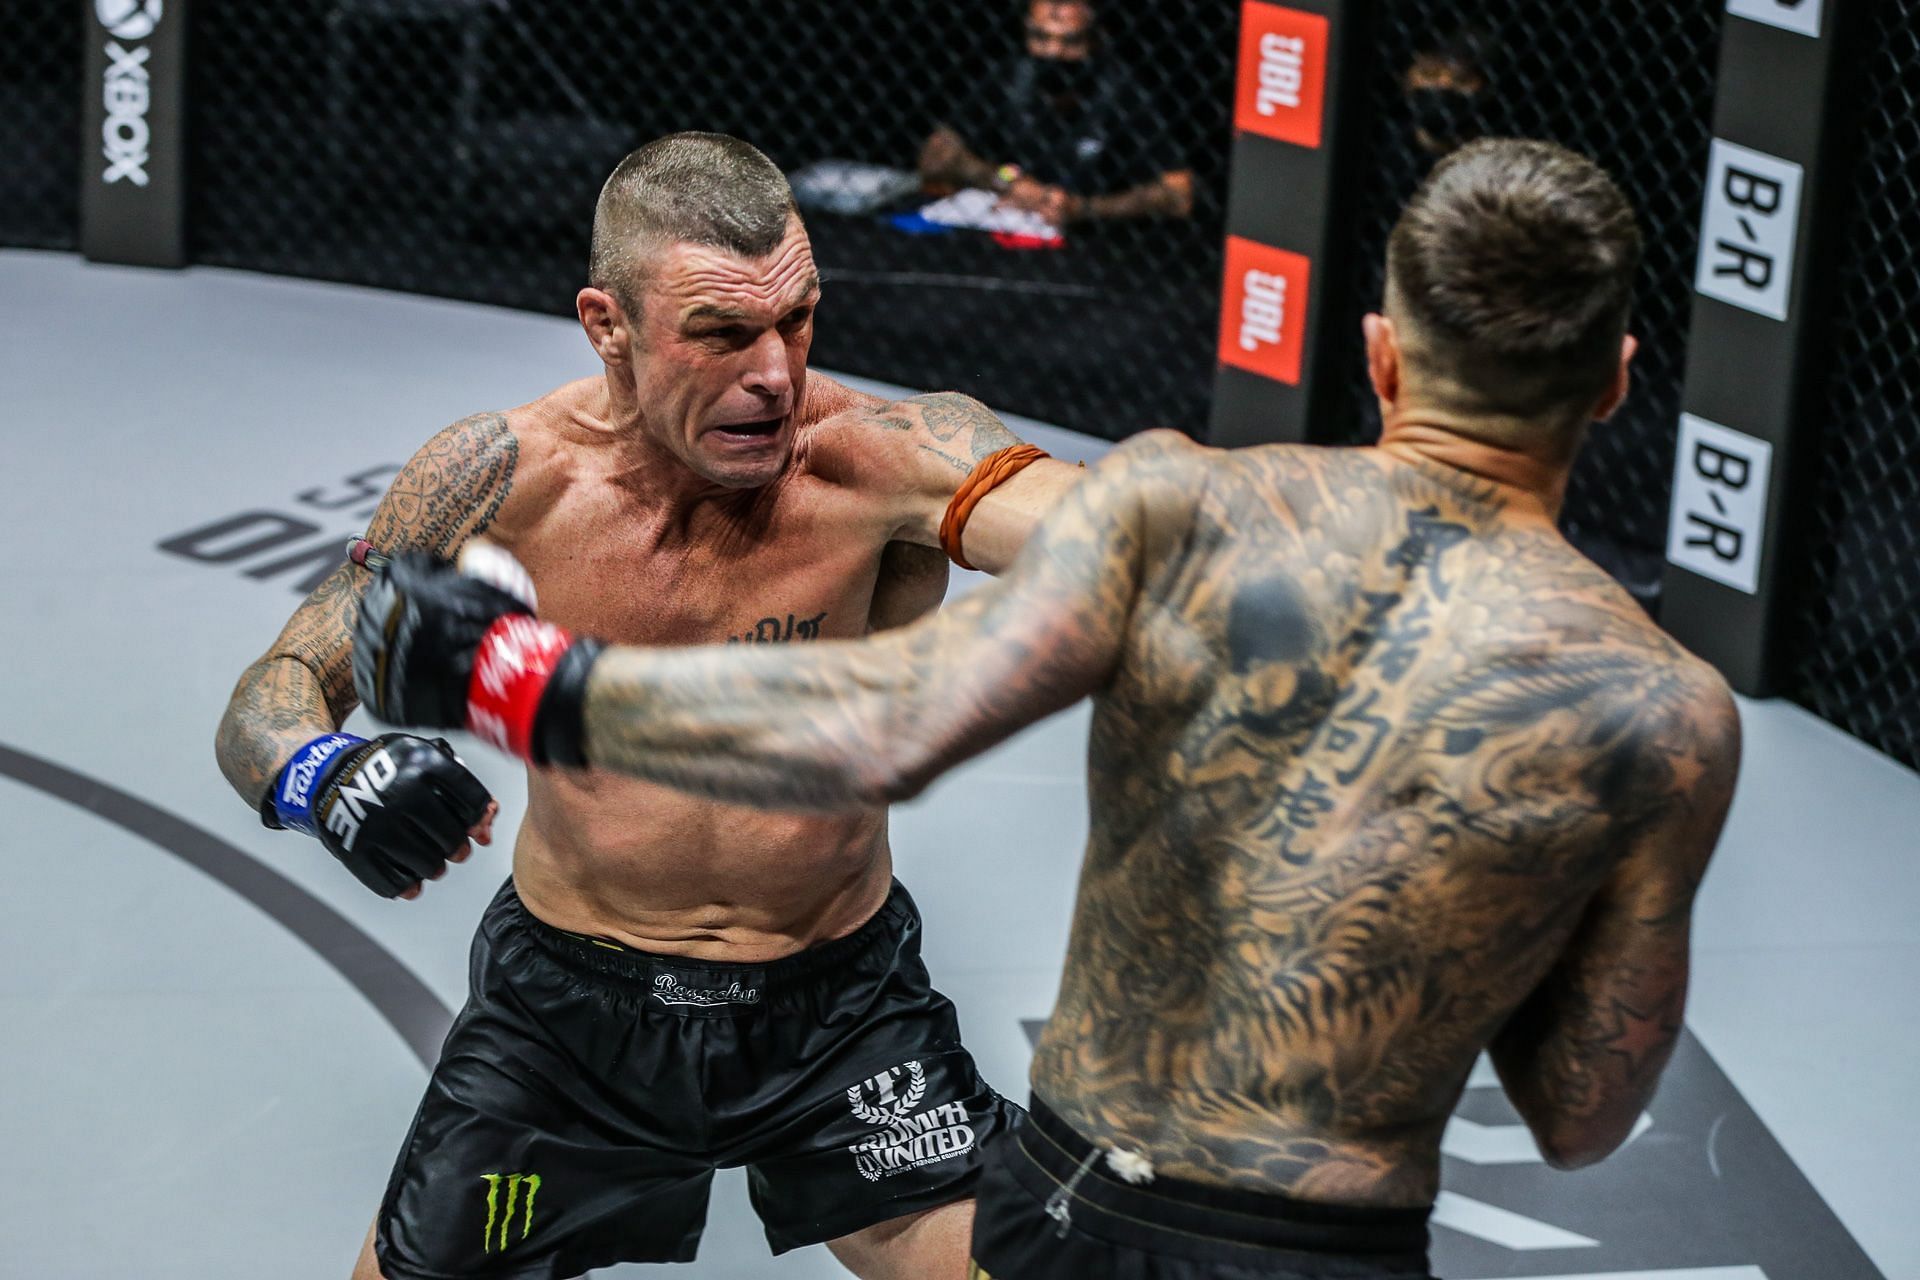 John Wayne Parr (Left) is fit and ready for another exciting performance at ONE X. | [Photo: ONE Championship]